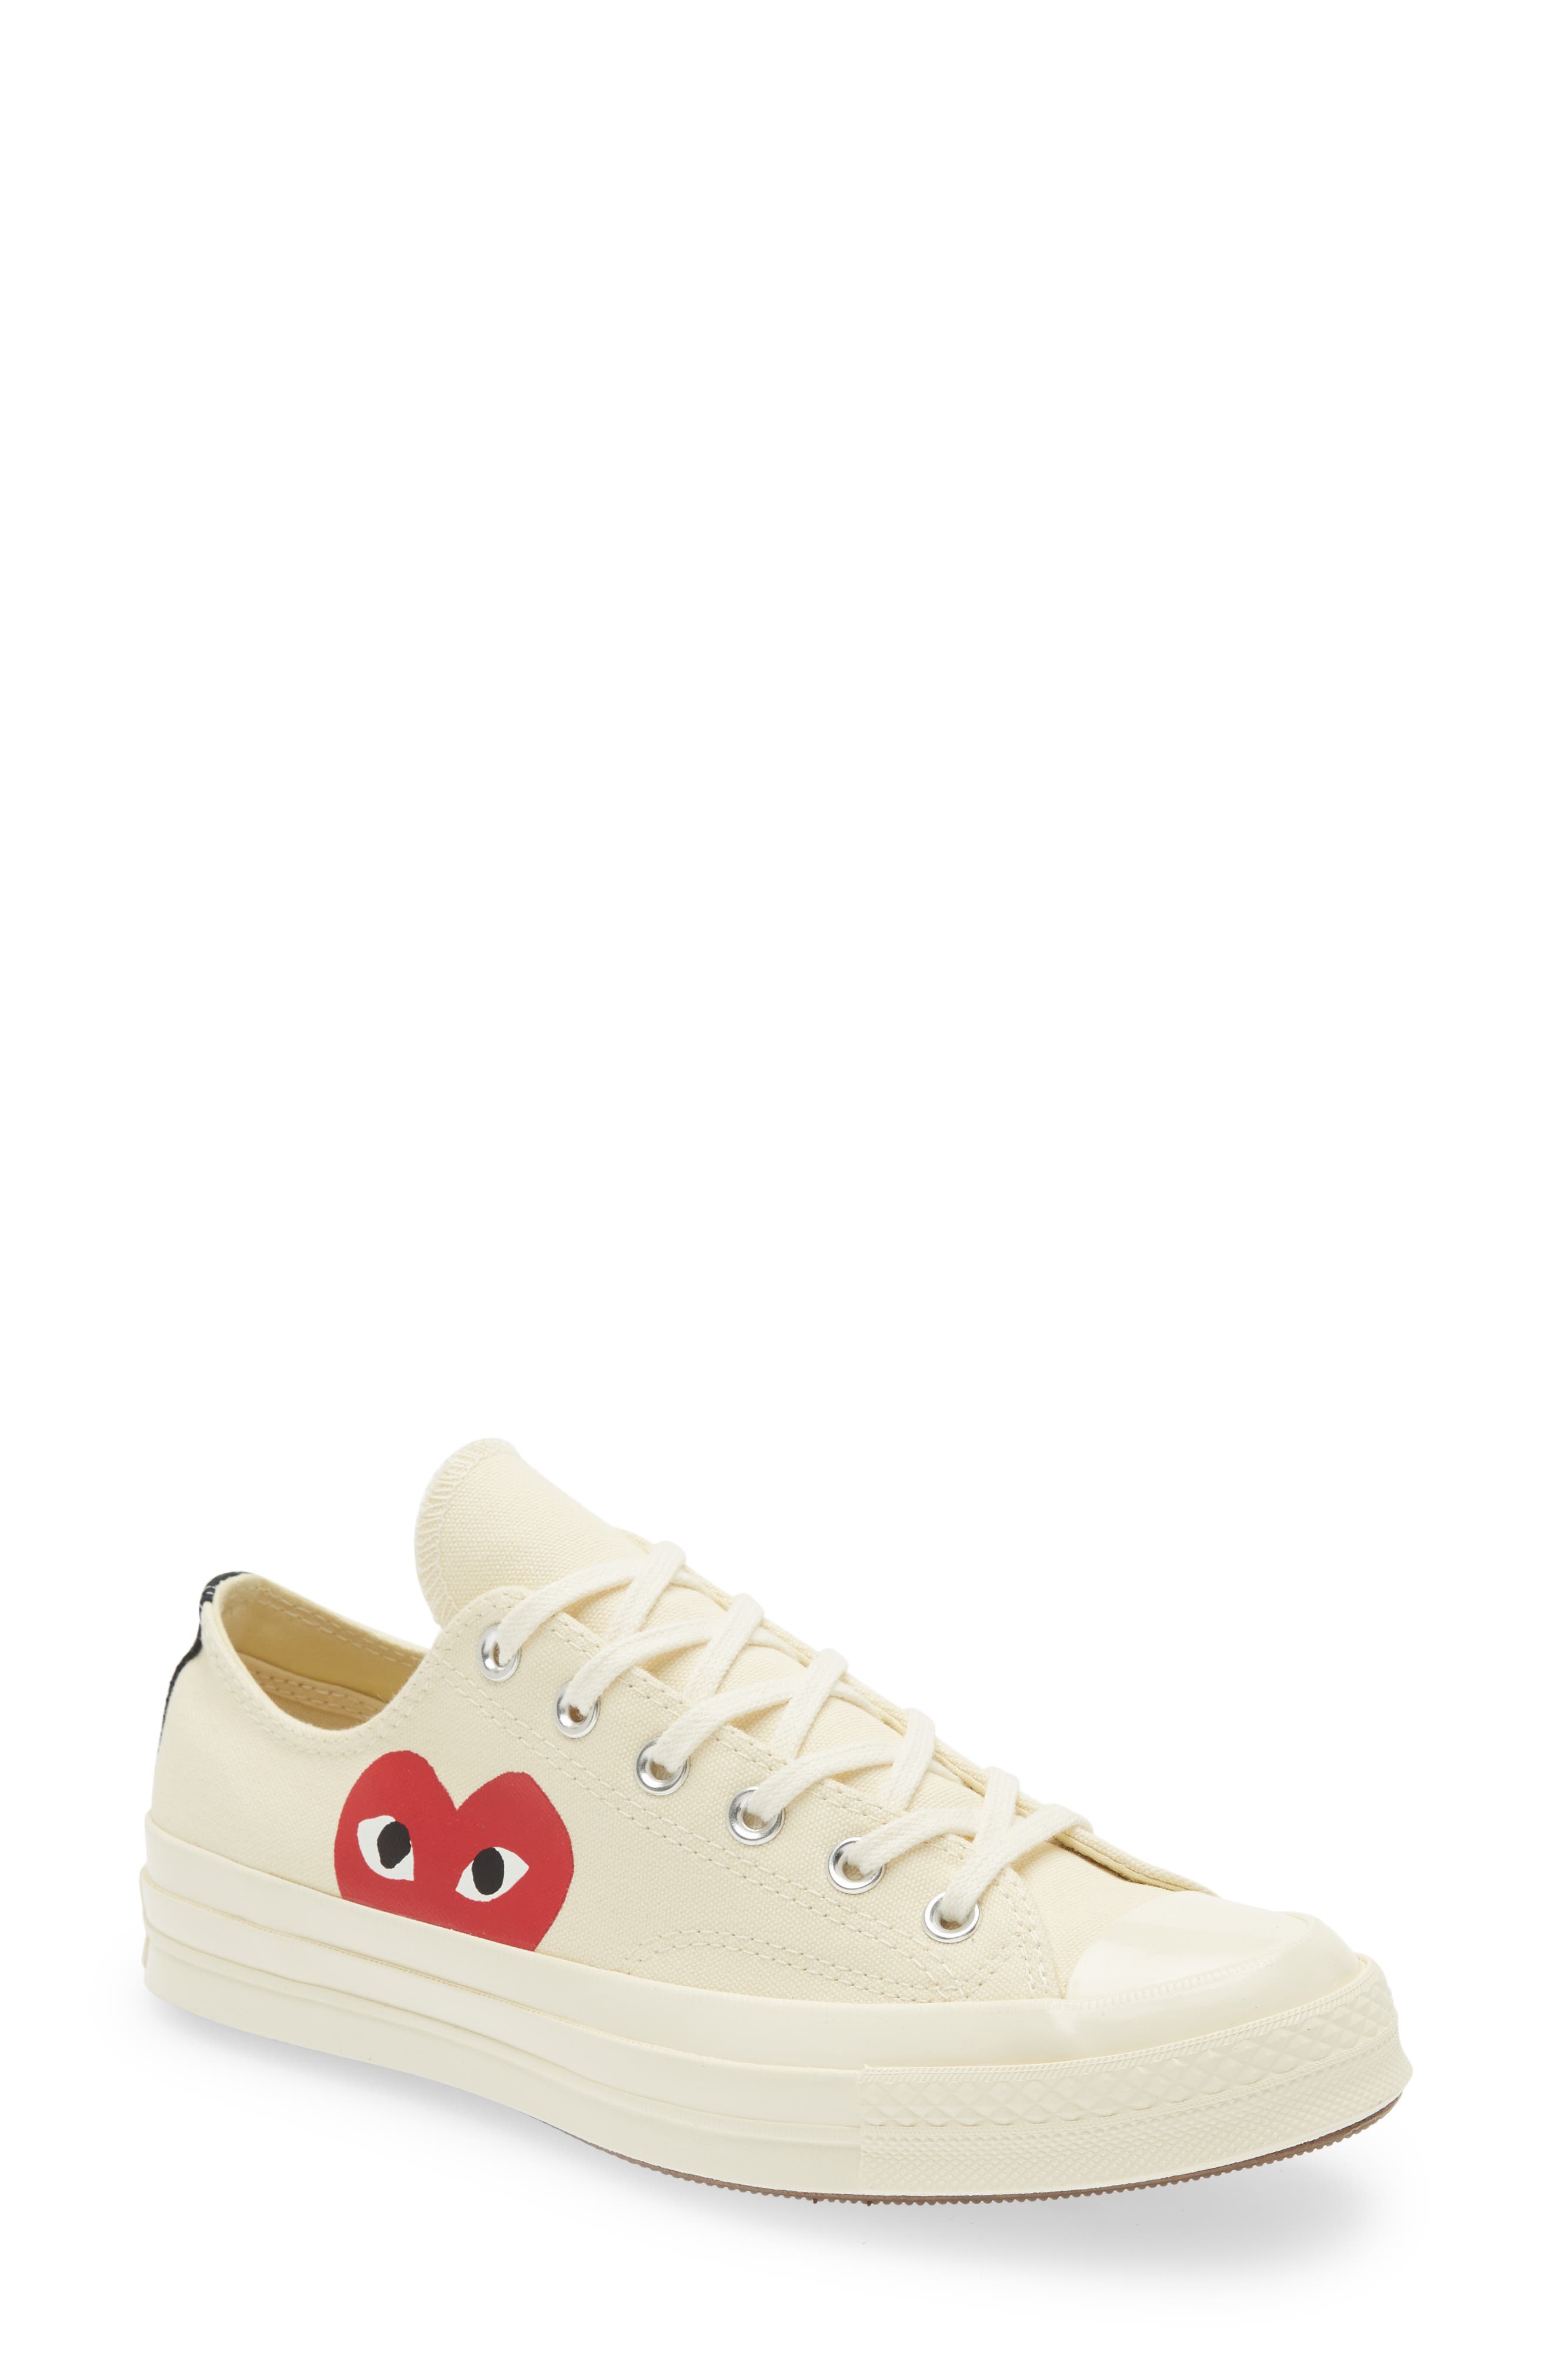 COMME DES GARCONS PLAY x Converse Chuck Taylor(R) Hidden Heart Low Top Sneaker in White